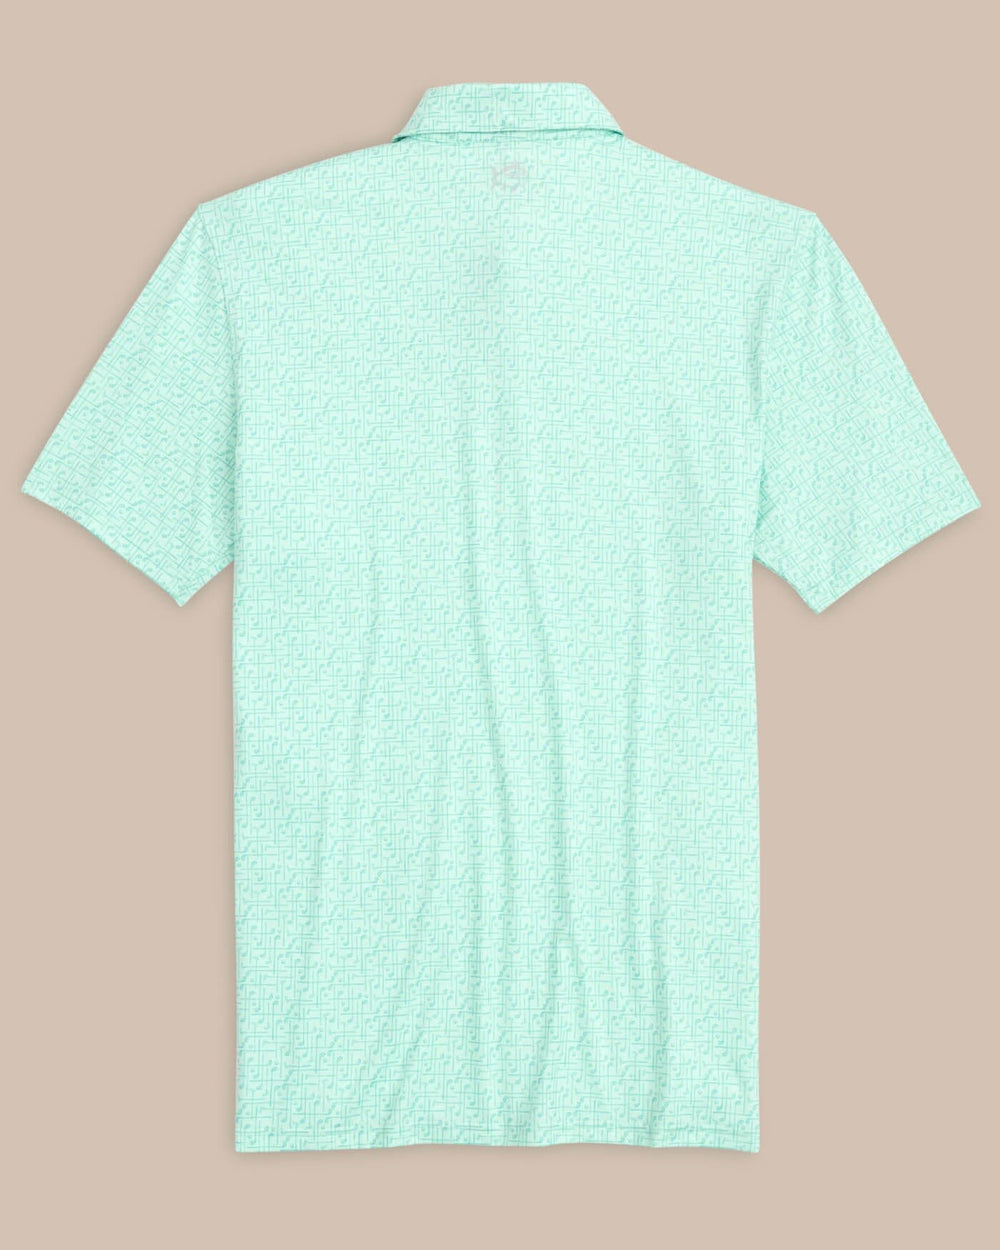 The back view of the Southern Tide Driver Over Clubbing Print Performance Polo Shirt by Southern Tide - Baltic Teal